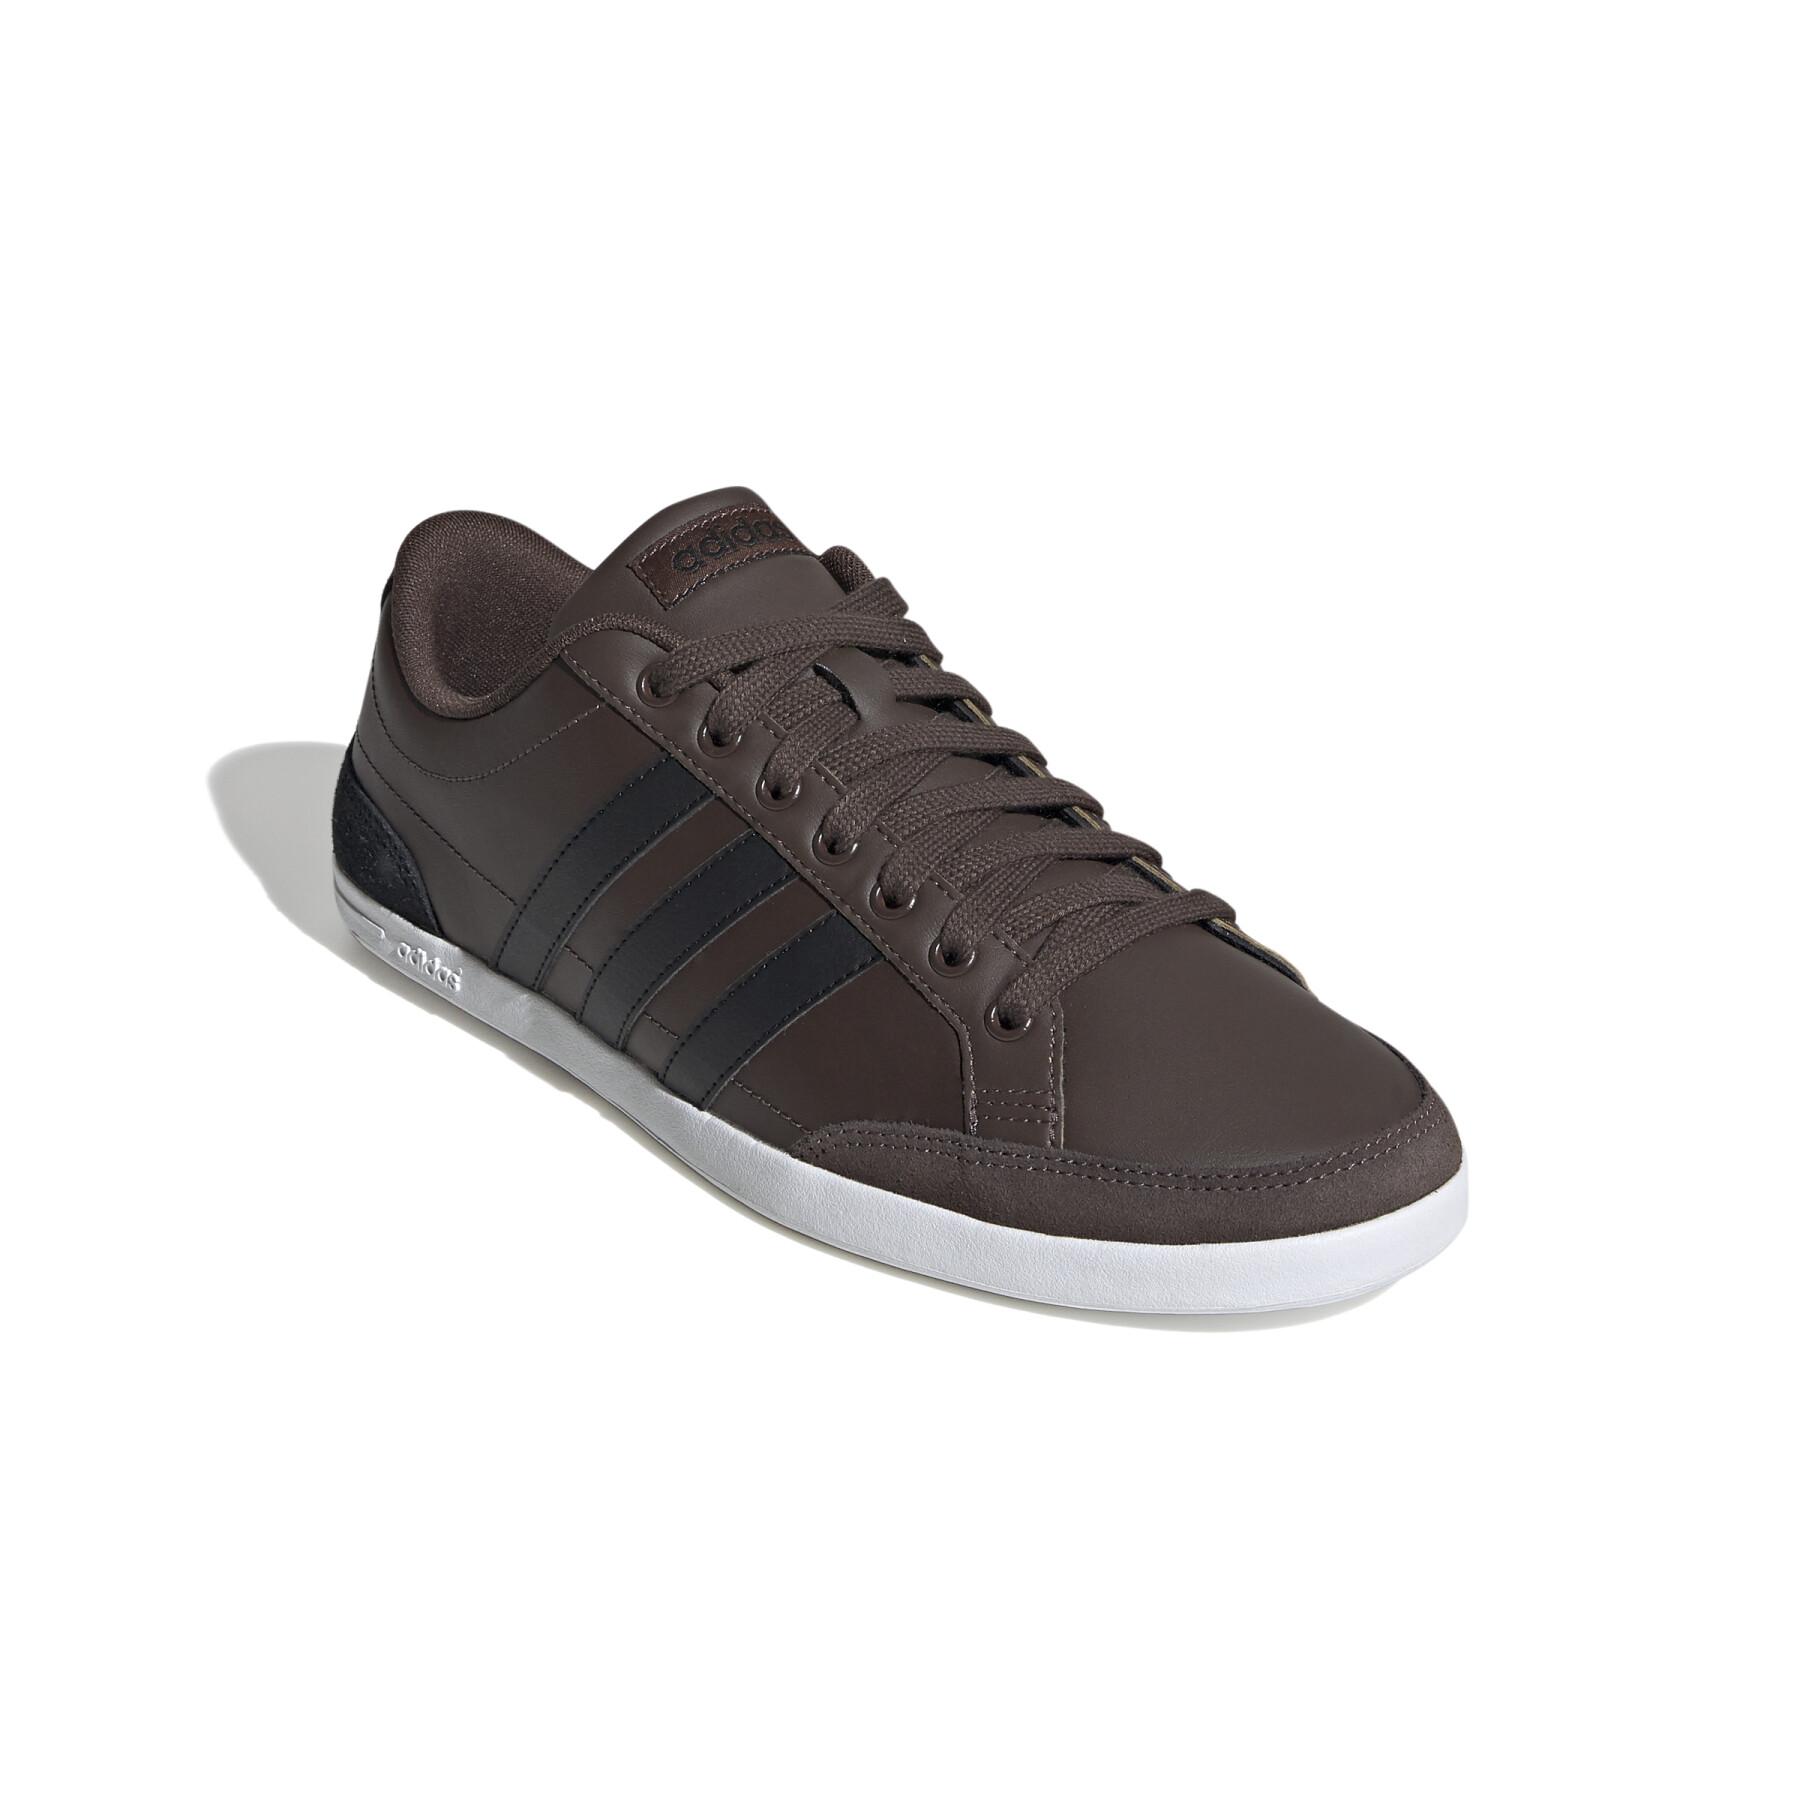 Trainers adidas Caflaire